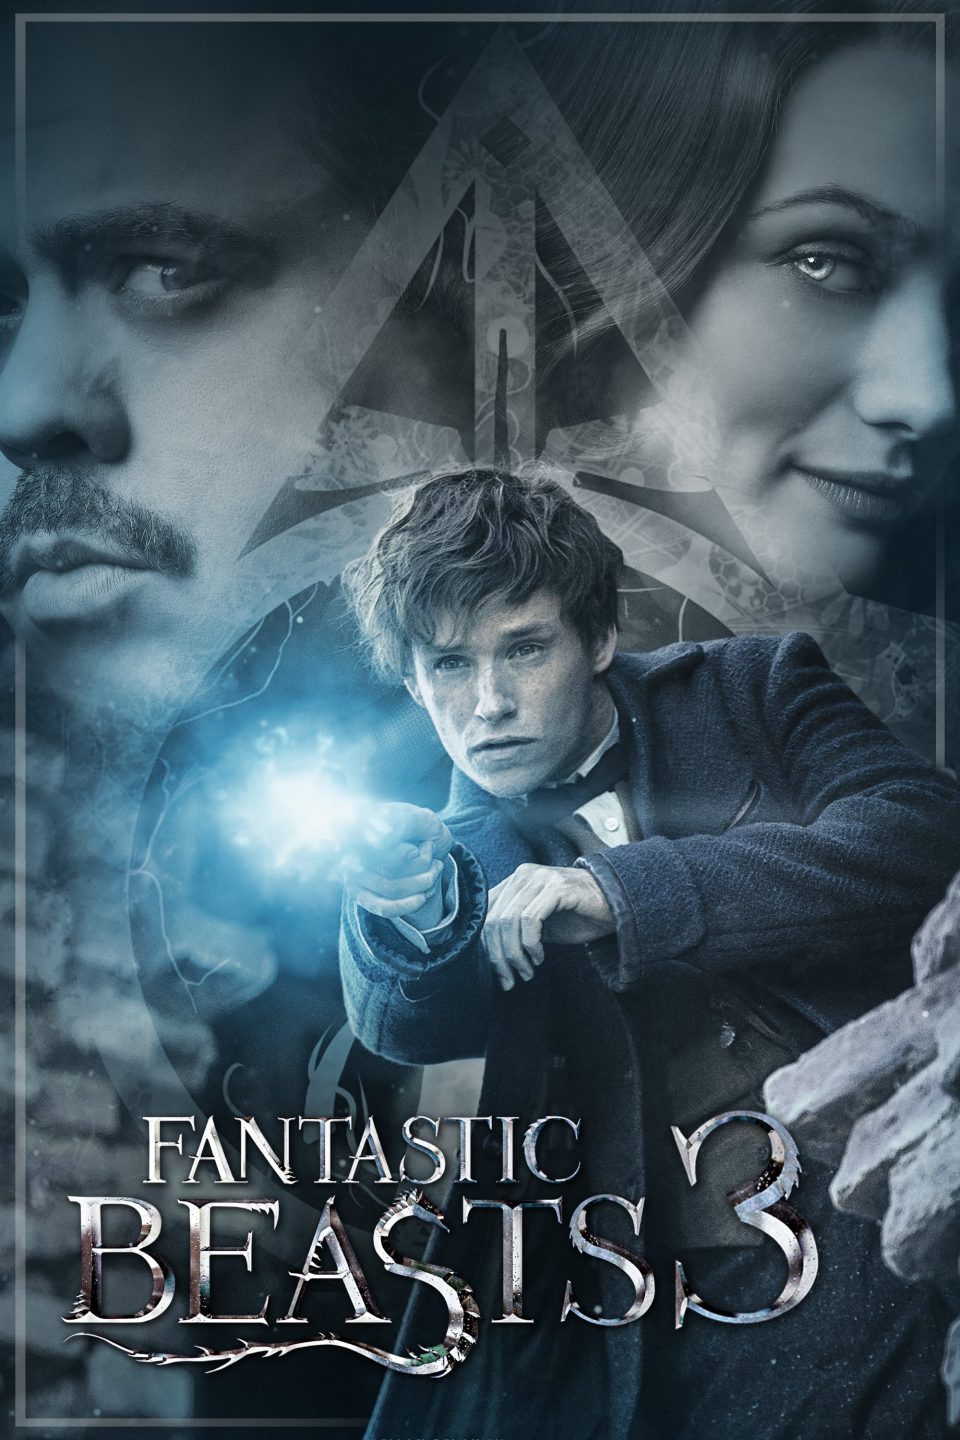 Poster for the movie "Fantastic Beasts 3"